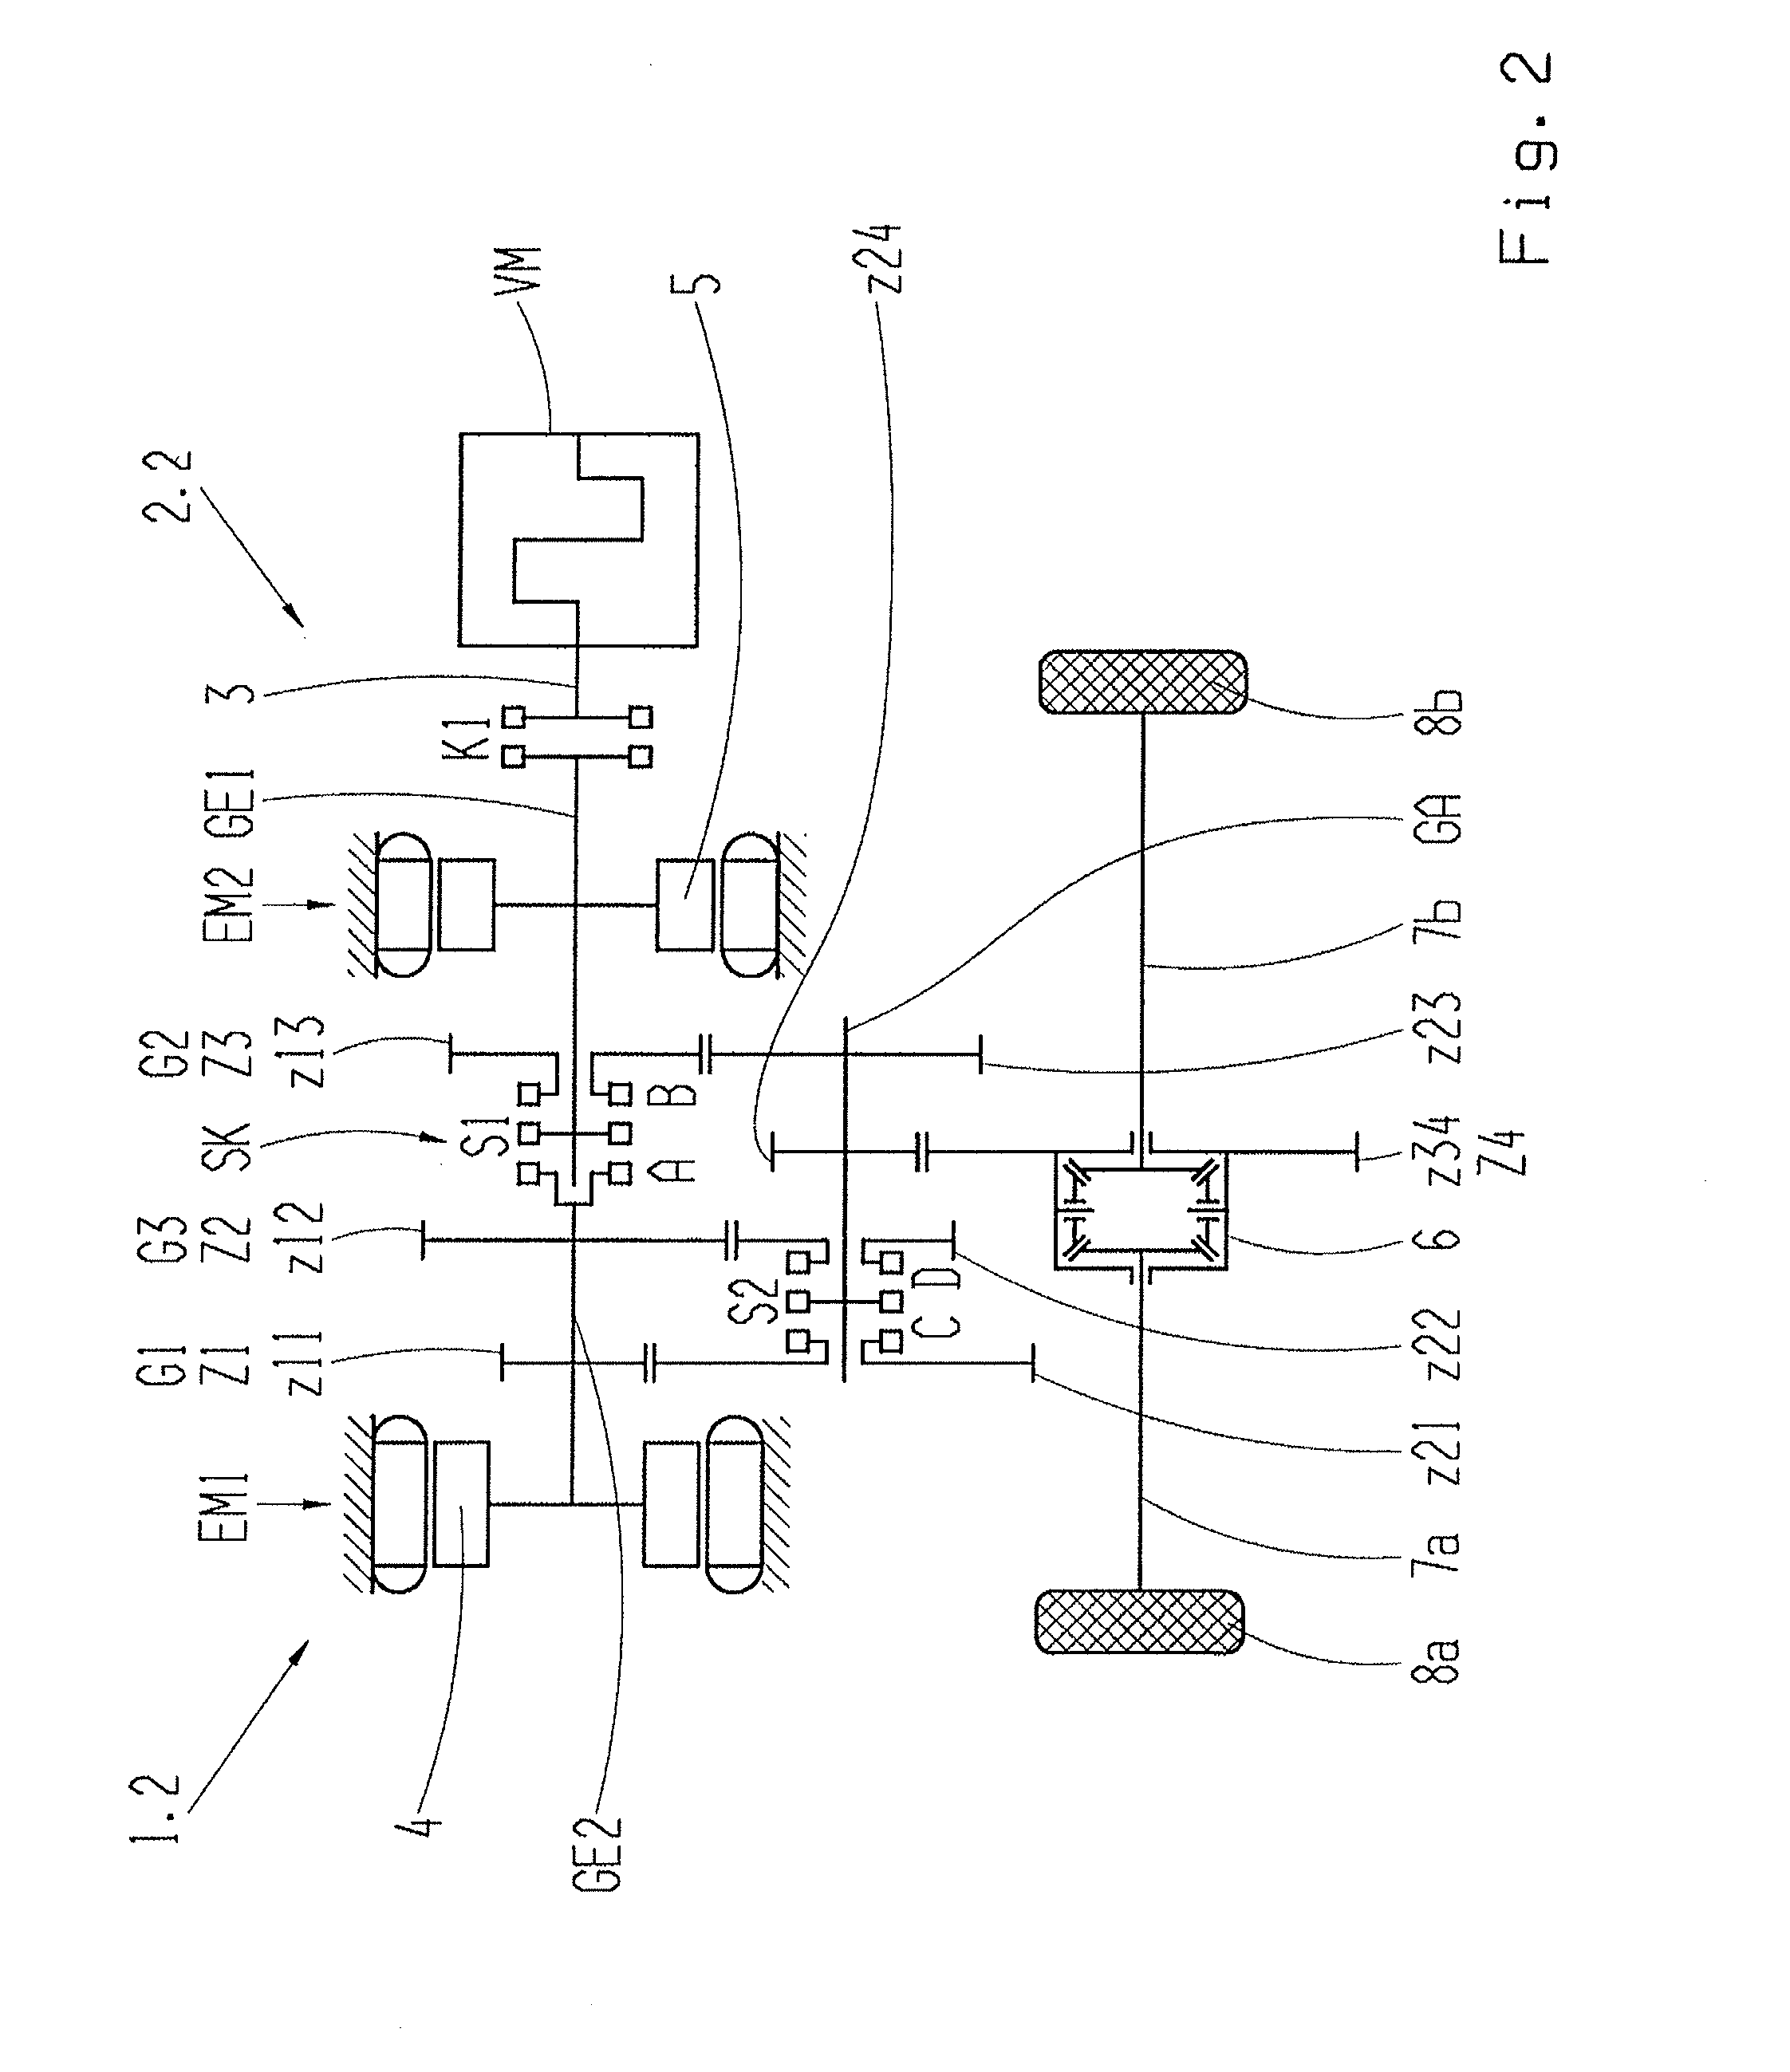 Hybrid drive of a motor vehicle and method for controlling a hybrid drive